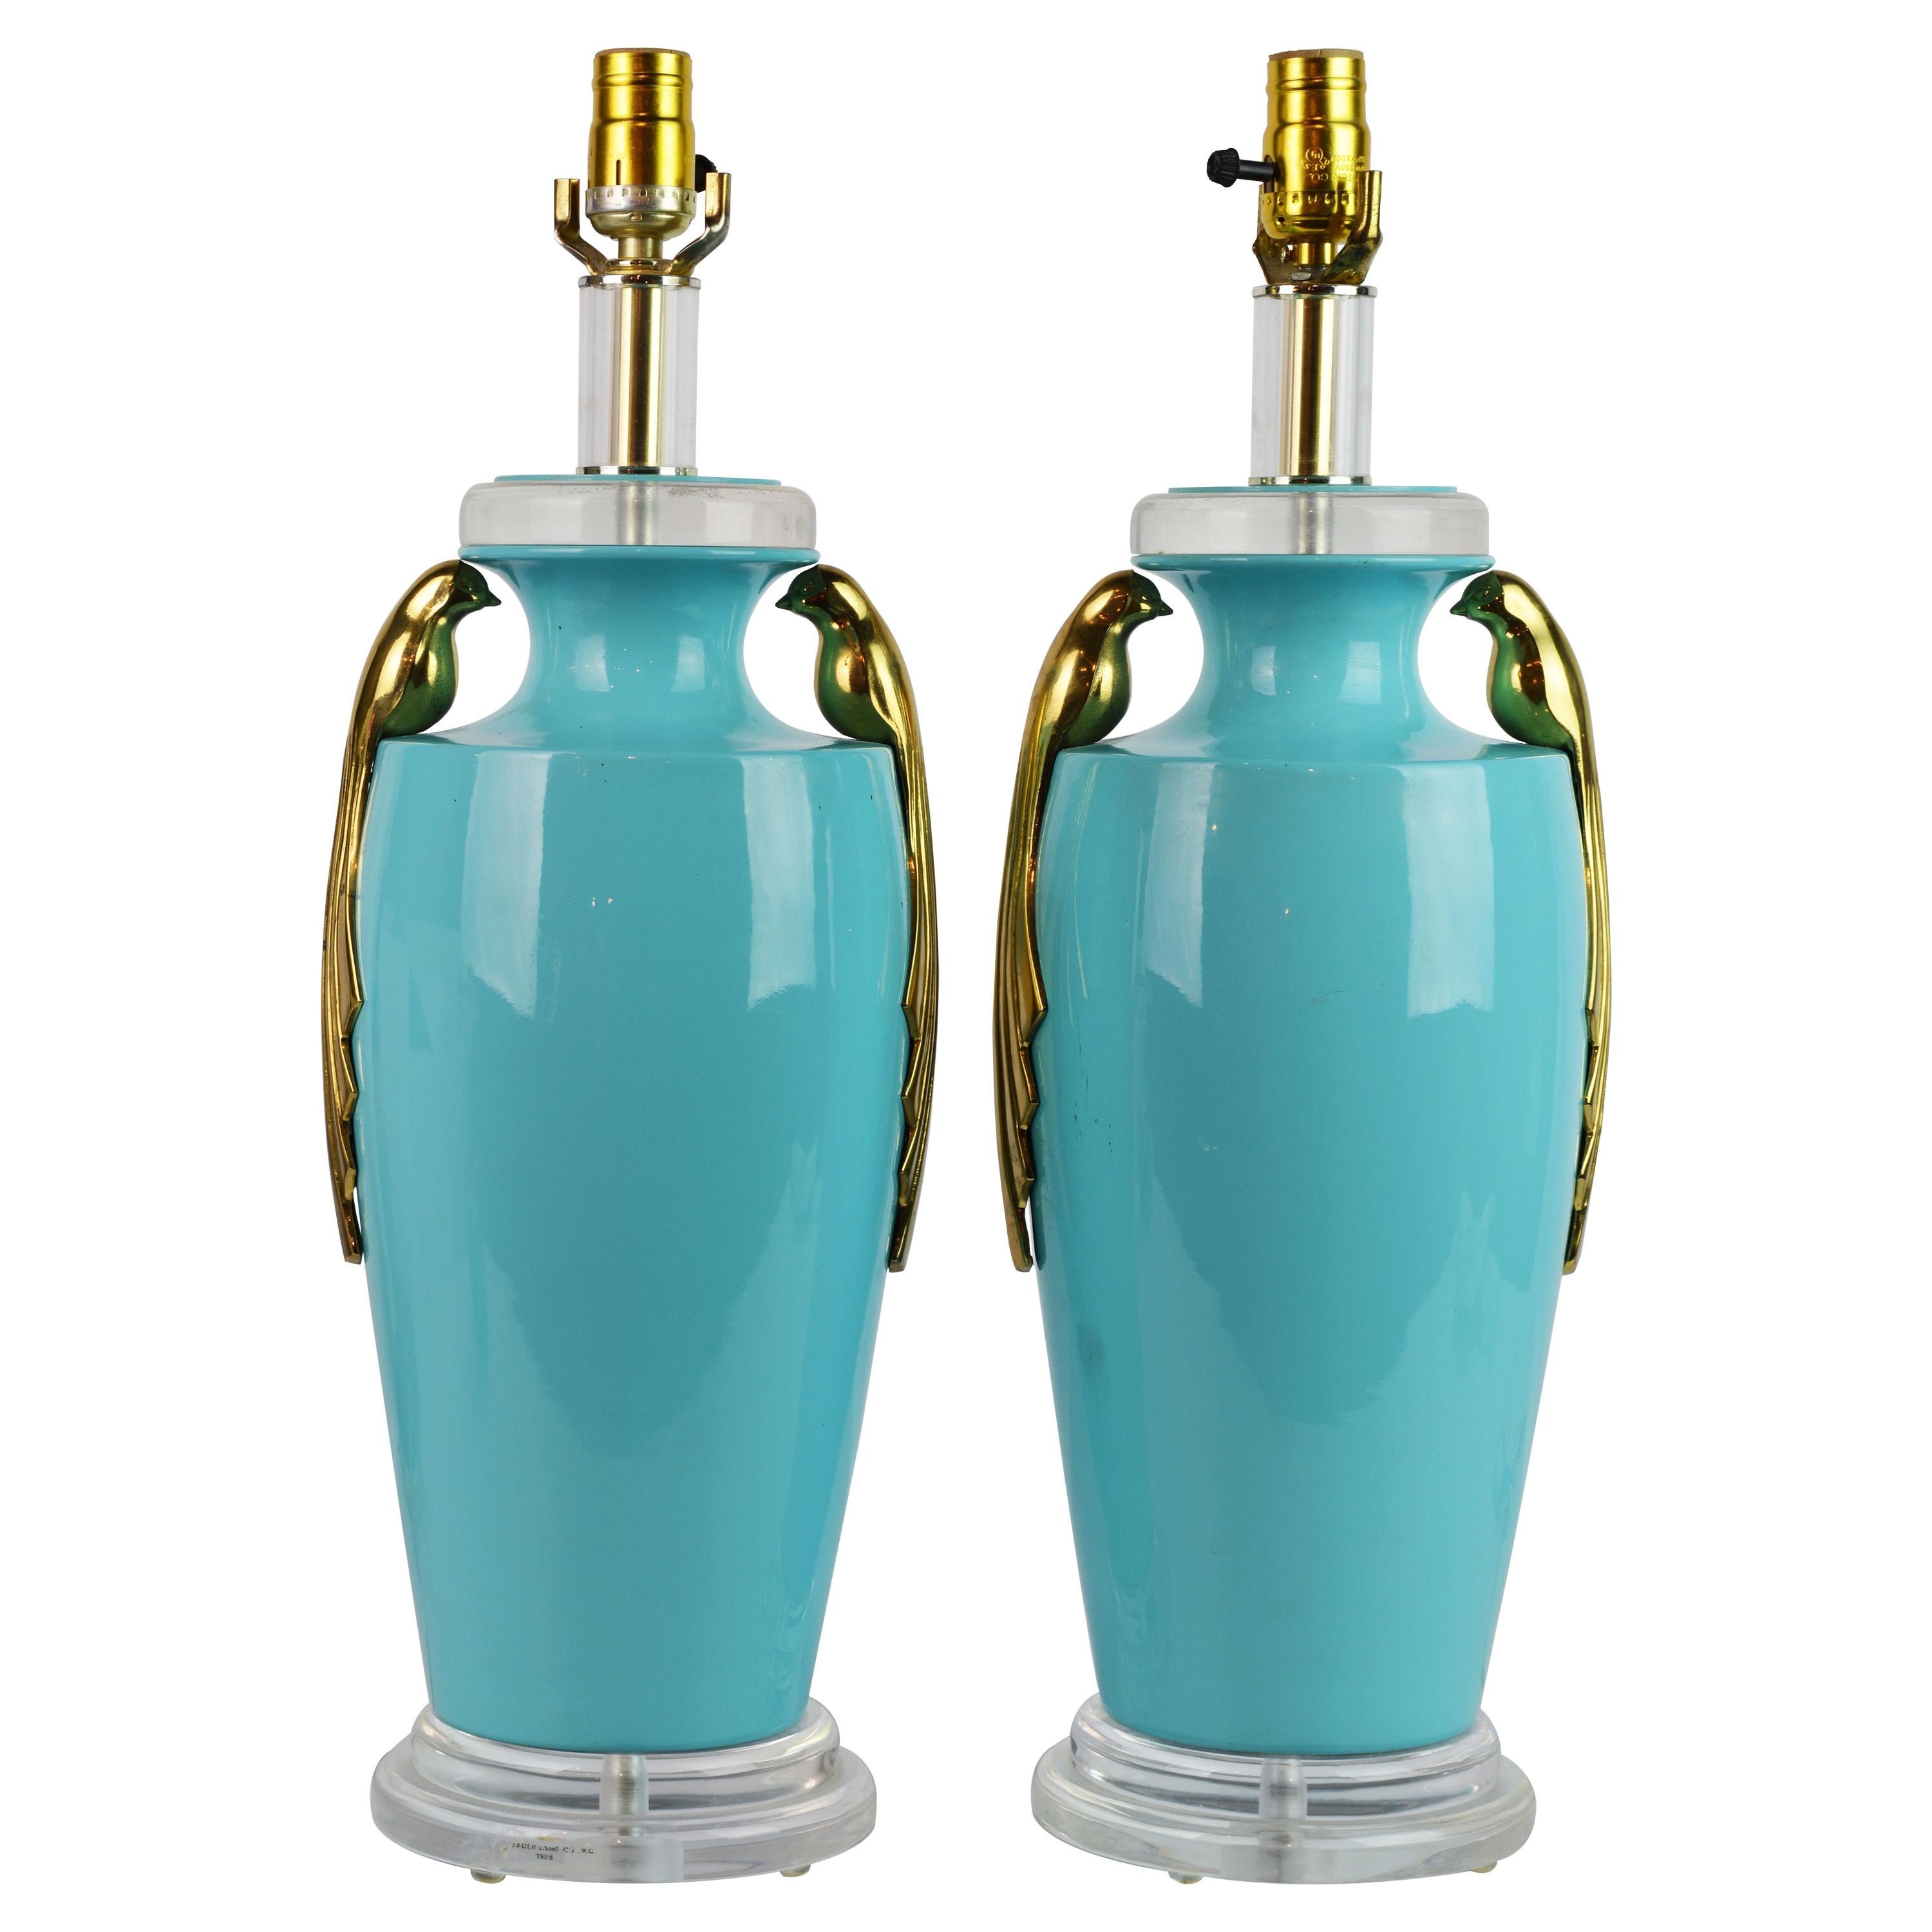 Pair of Tiffany Blue Ceramic Table Lamps with Paradise Birds by Bauer Lamp Co.